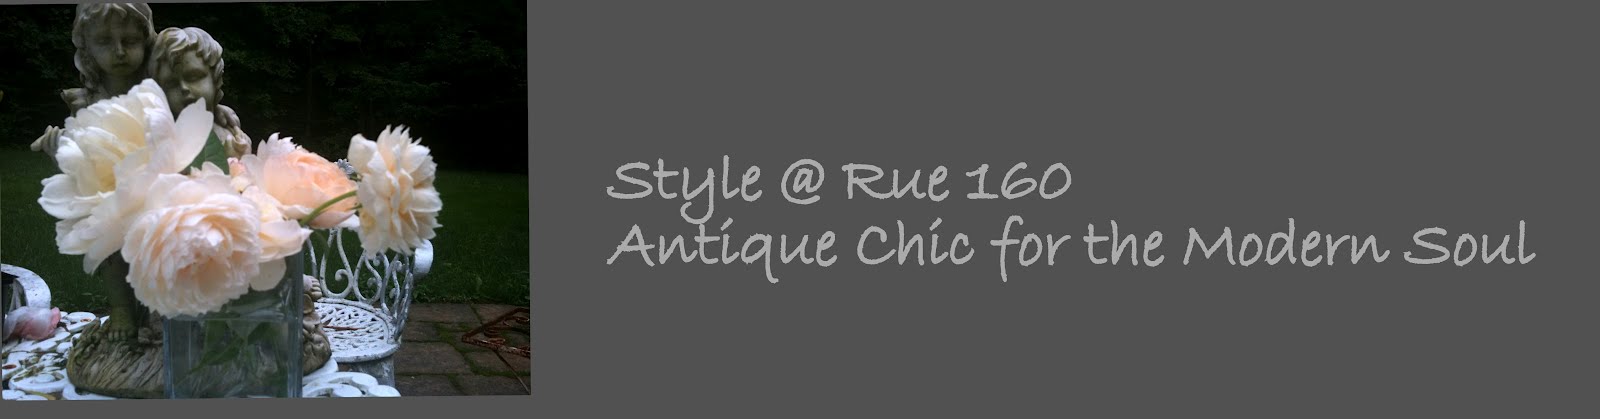 Style at Rue160, Antique Chic for the Modern Soul